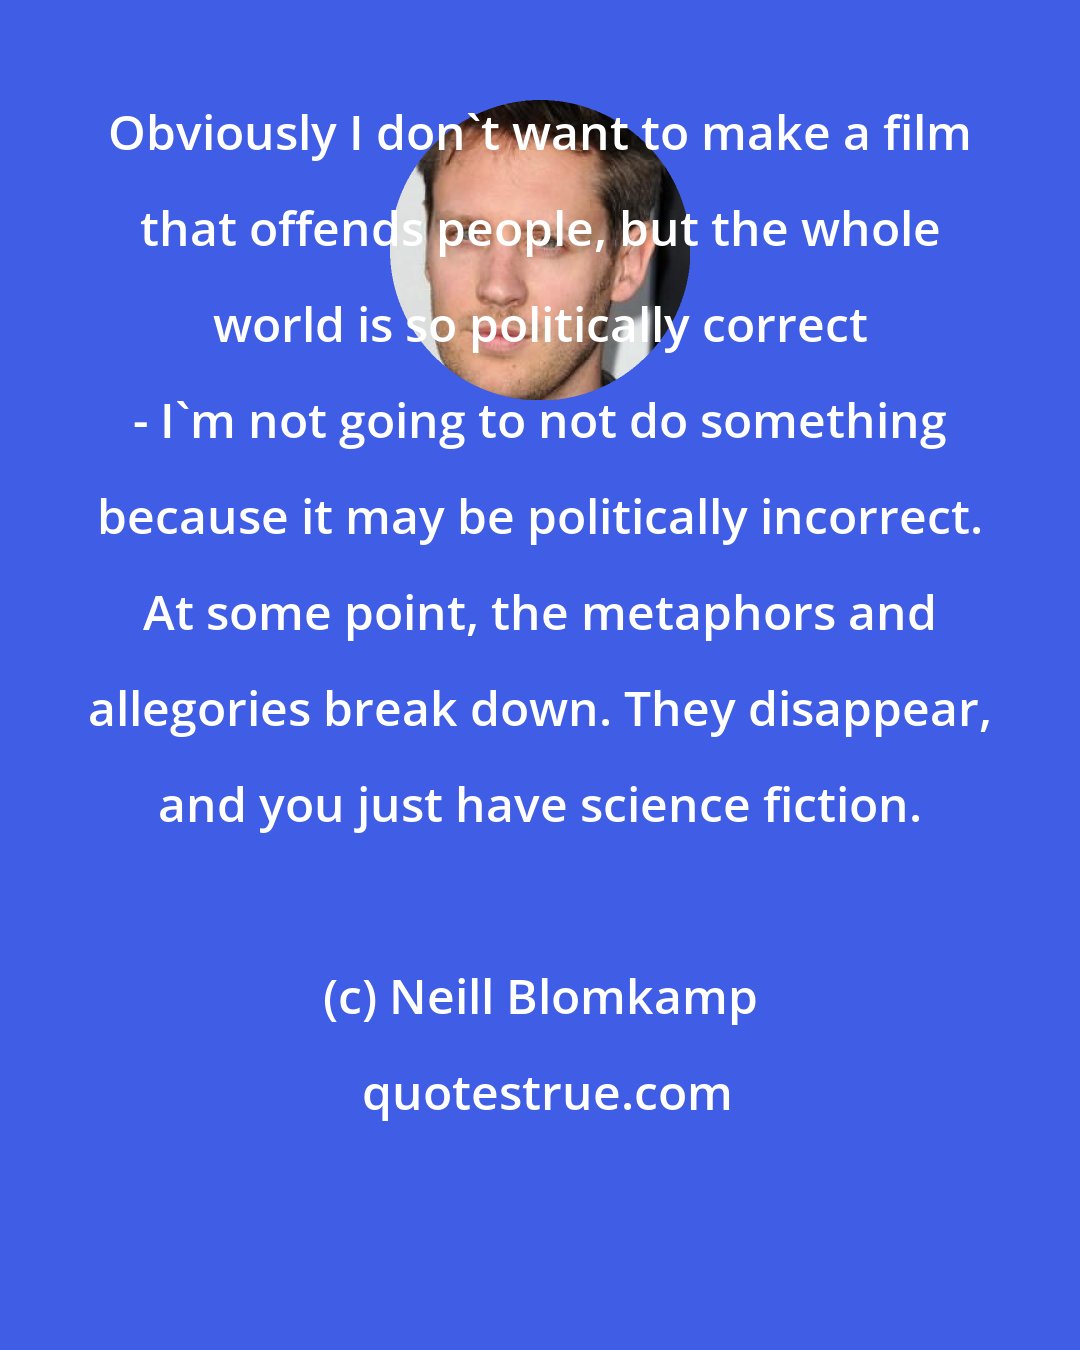 Neill Blomkamp: Obviously I don't want to make a film that offends people, but the whole world is so politically correct - I'm not going to not do something because it may be politically incorrect. At some point, the metaphors and allegories break down. They disappear, and you just have science fiction.